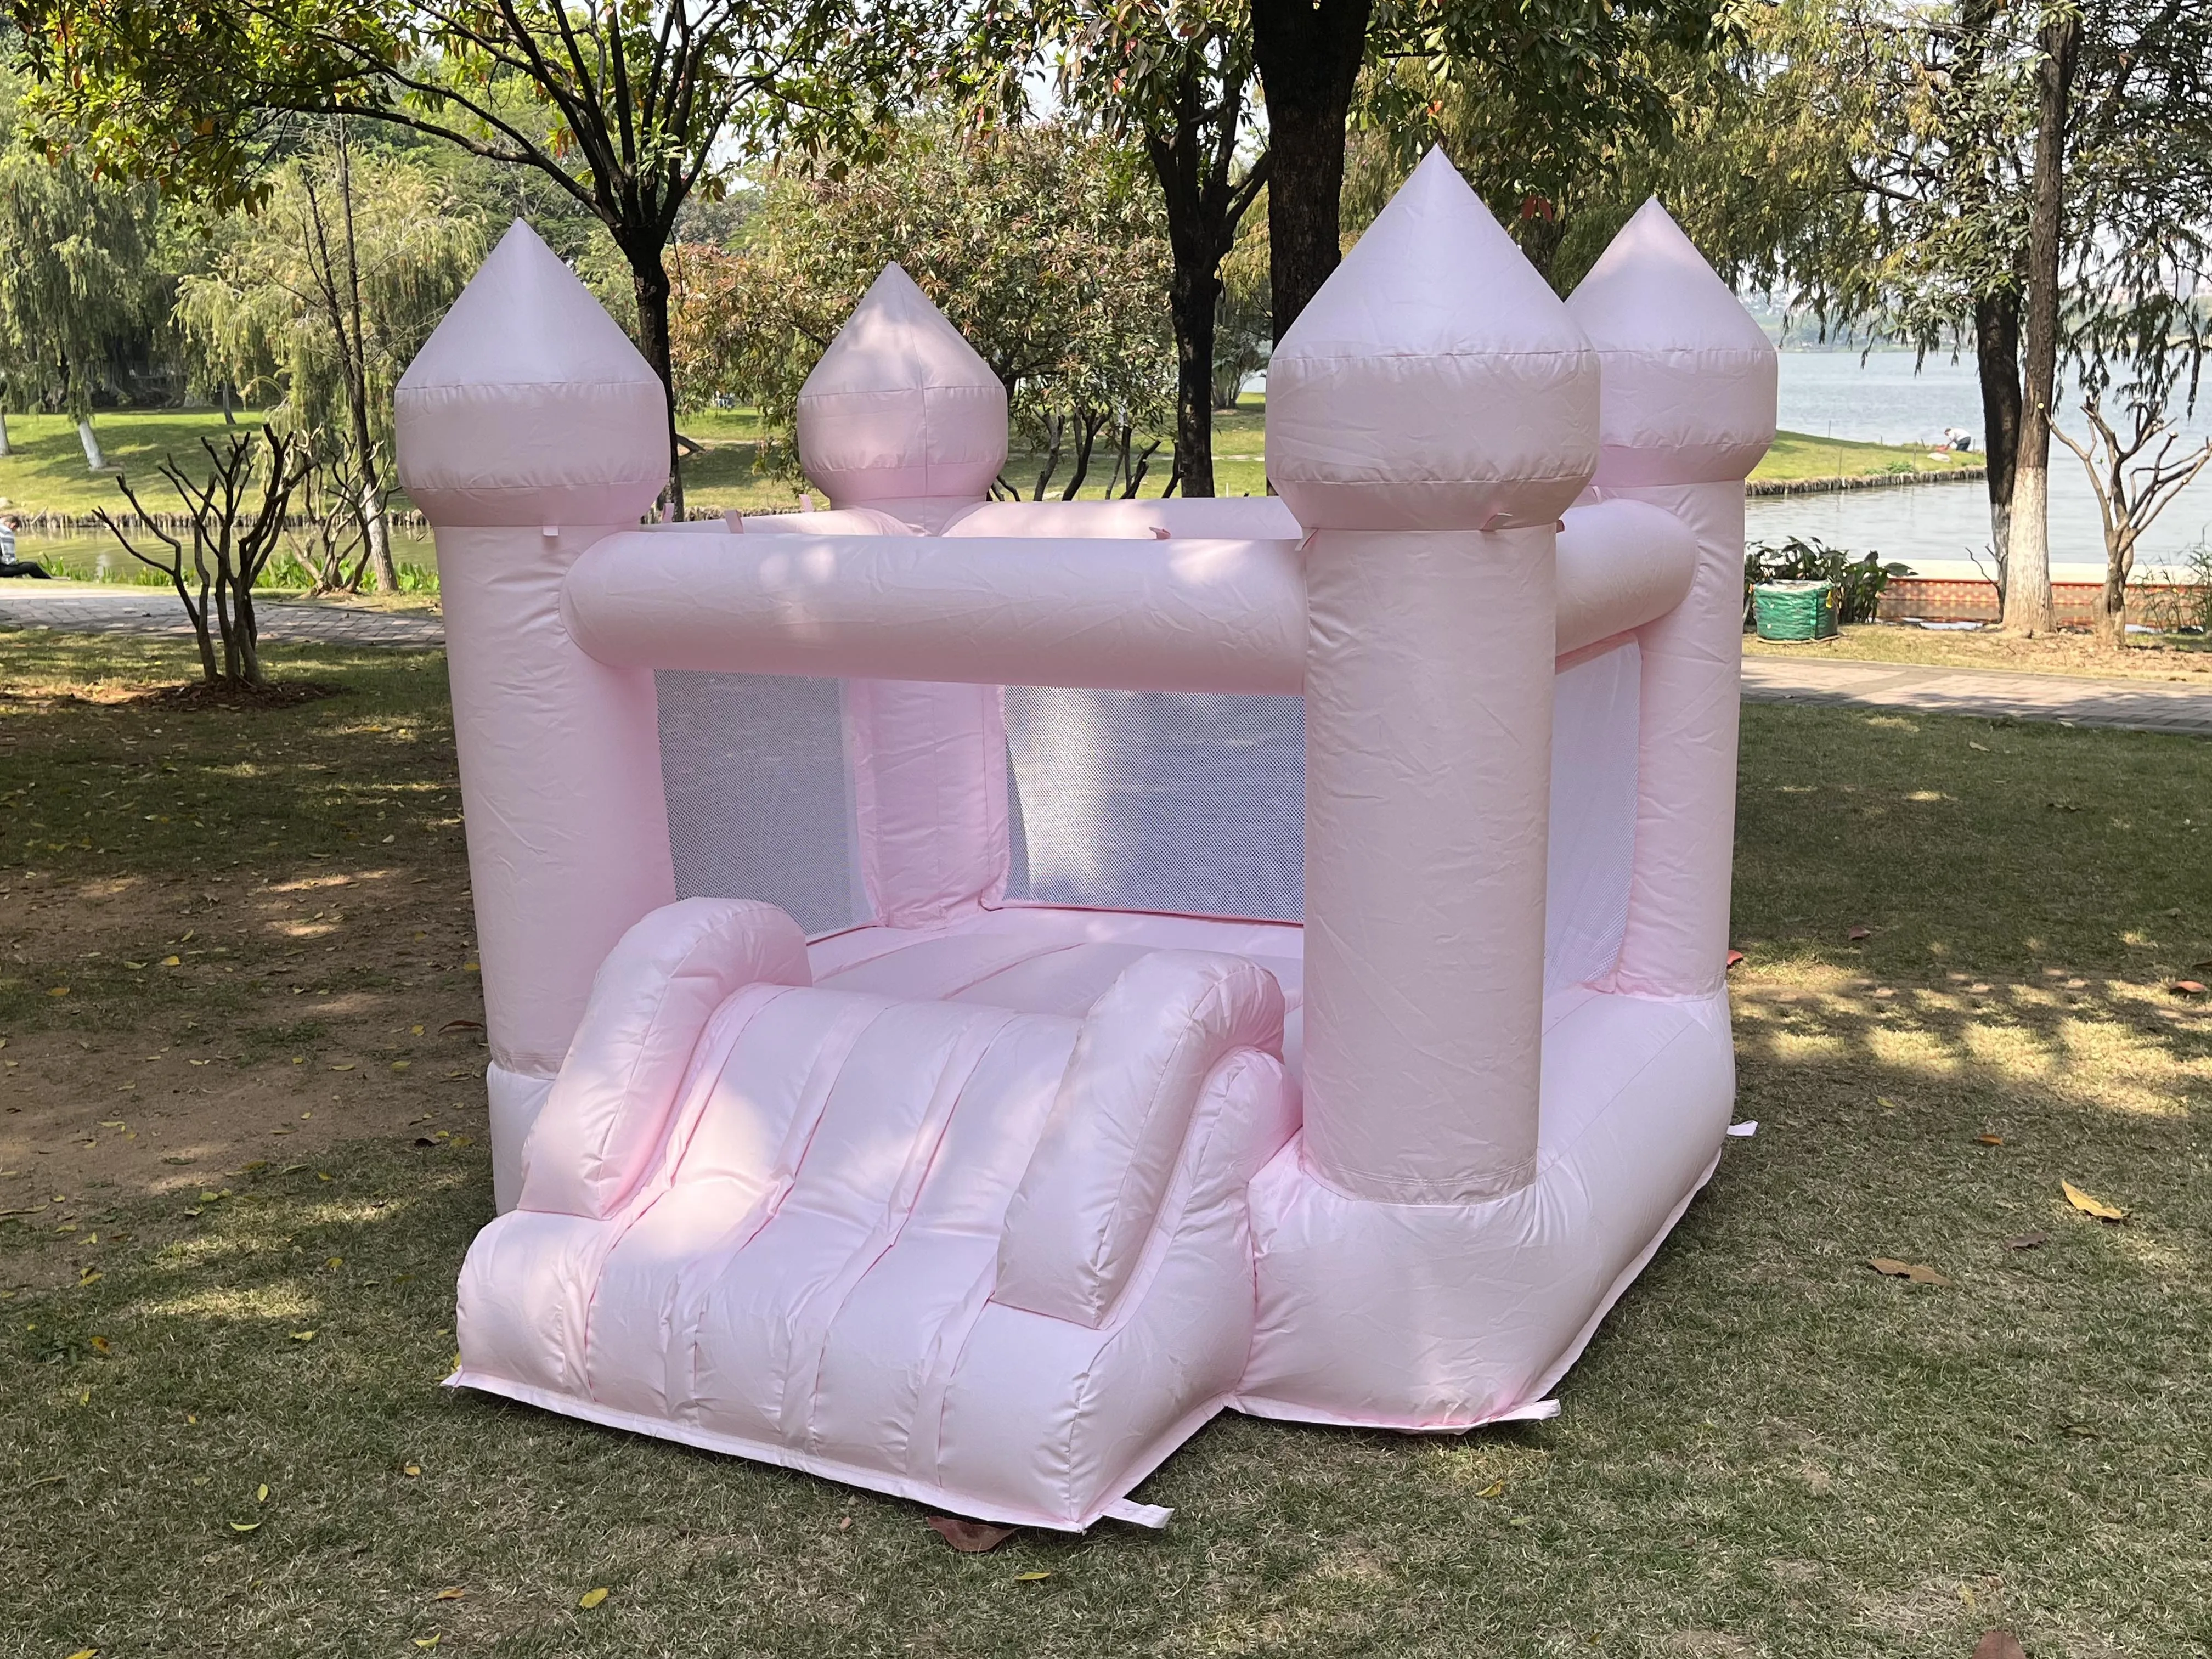 

6FT Inflatable White Bounce House PVC Bouncy Castle Bounce House with Slide for Kids Party